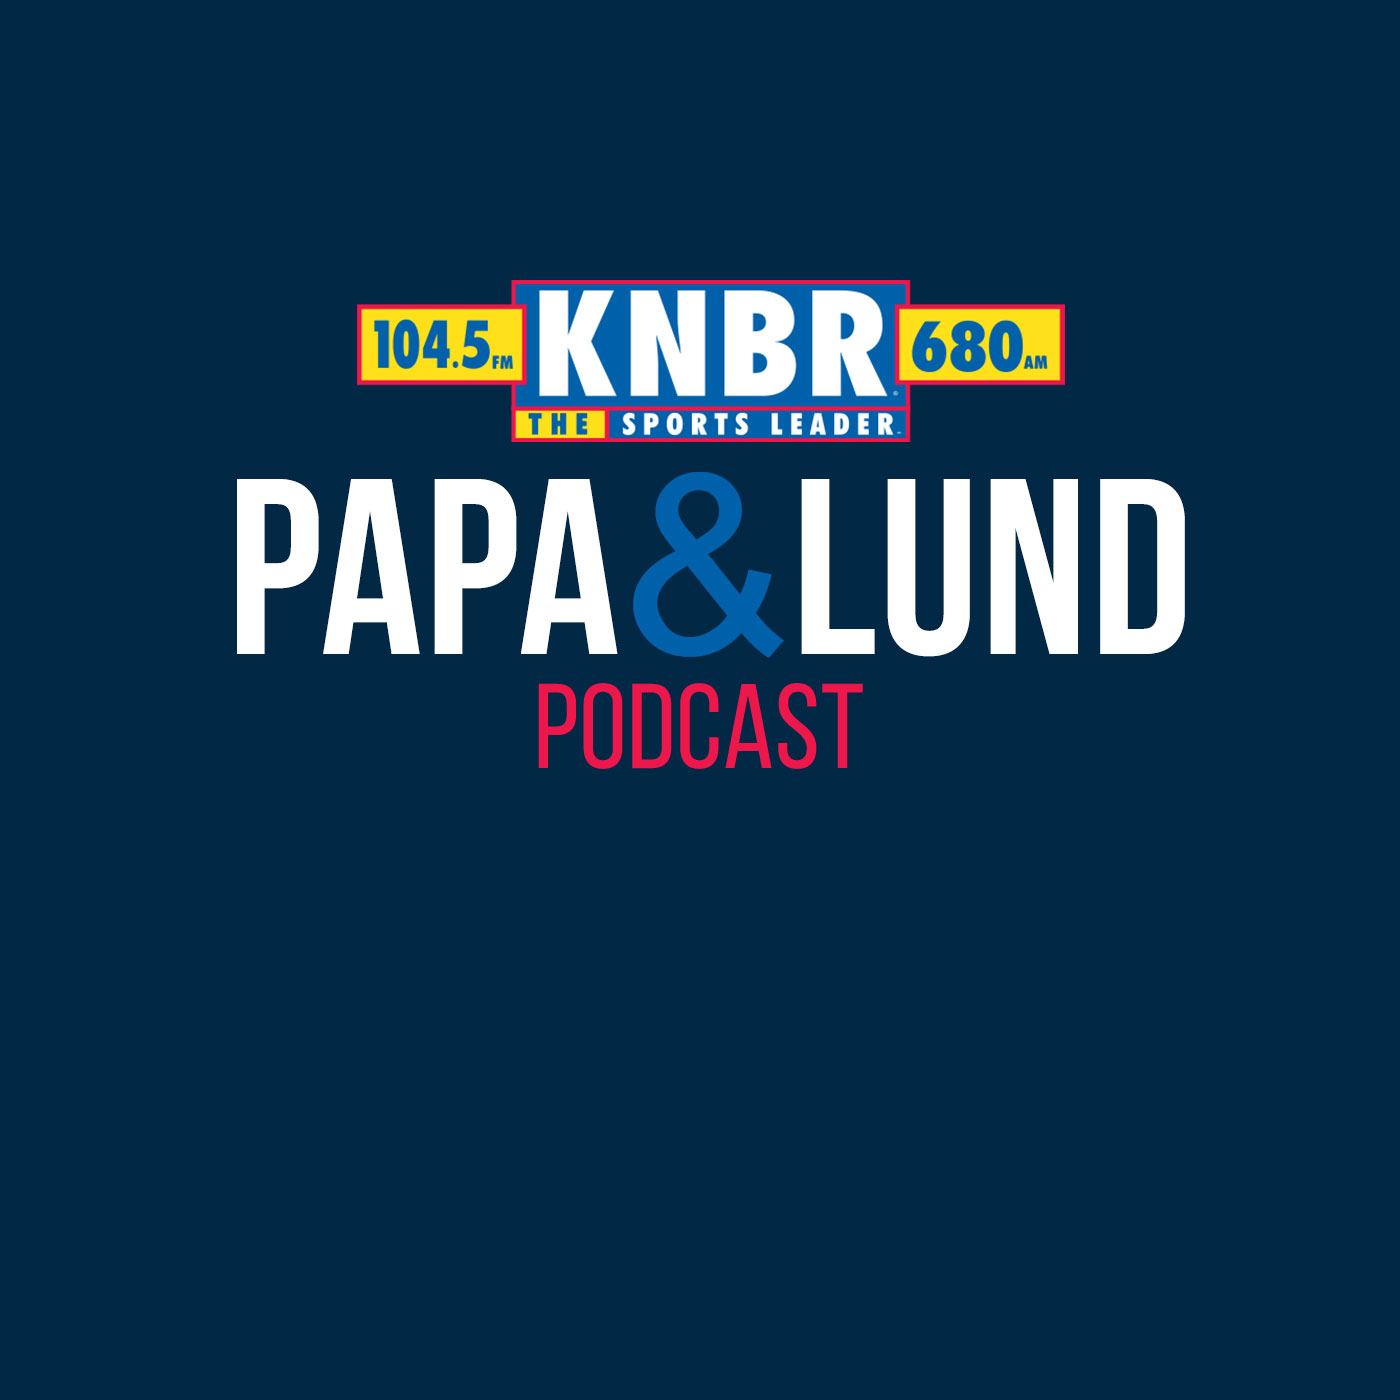 6-14 Shawn Estes joins Papa & Lund to discuss the Giants recent winnings streak, importance of sweeping the Dodgers and how defense plays a key role in their recent and long term success